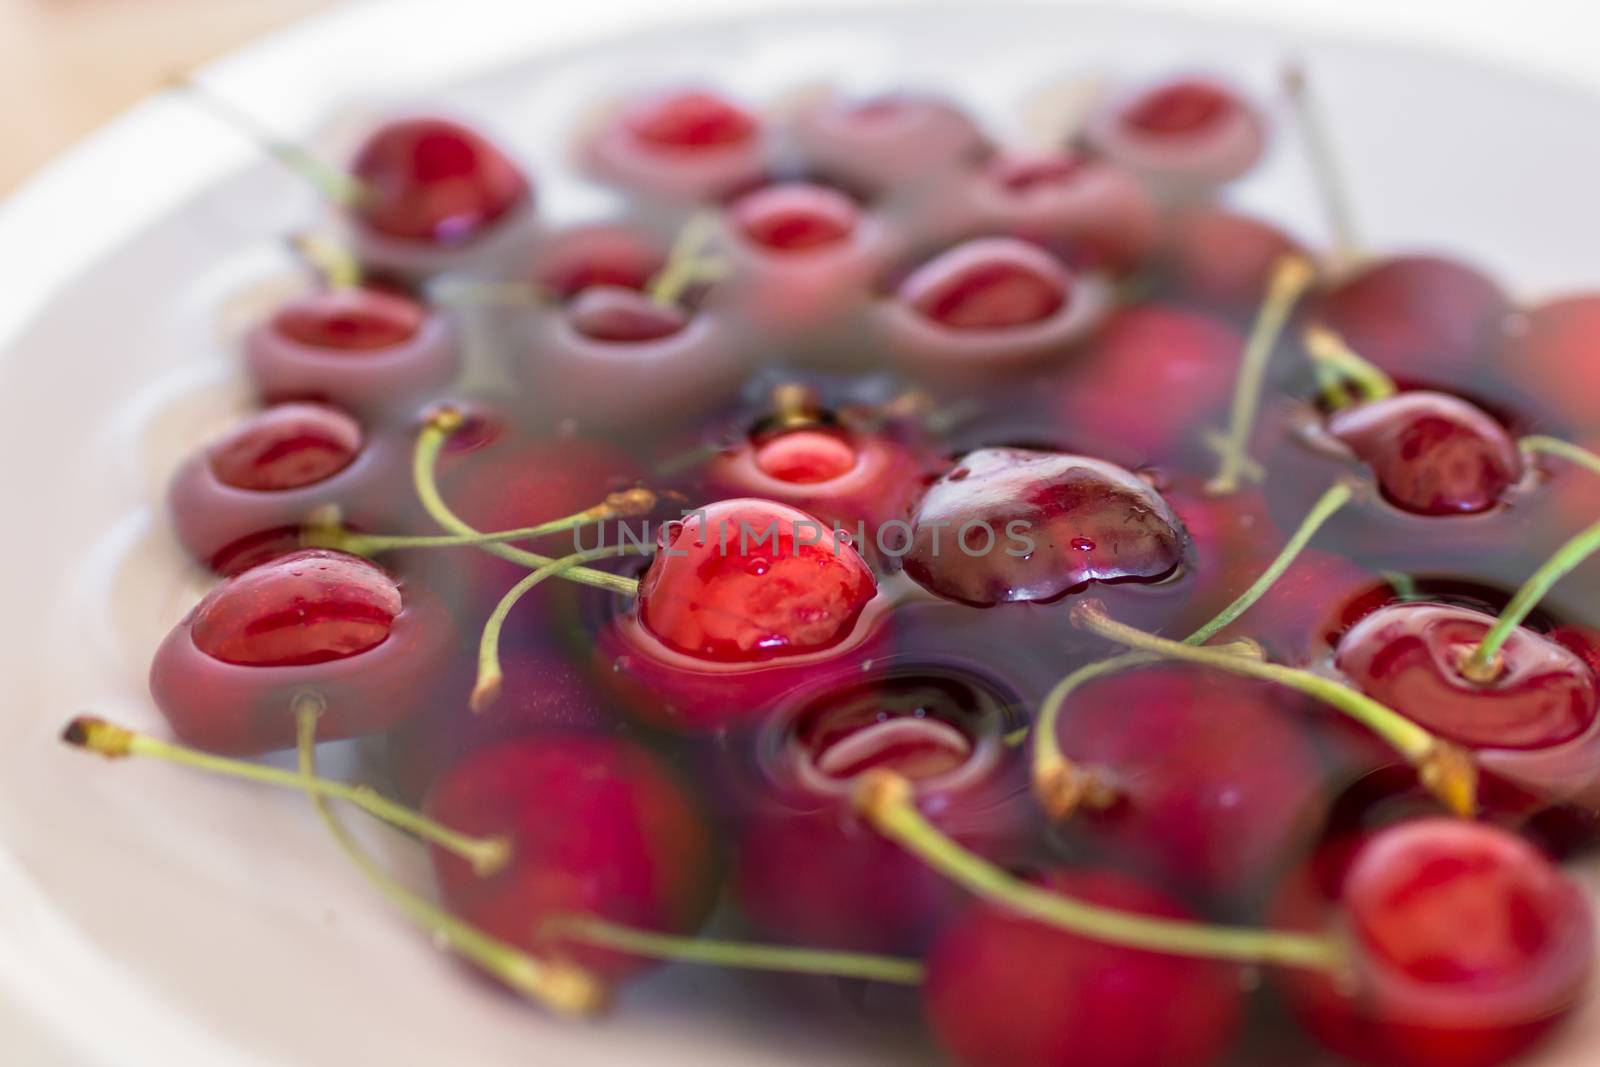 Cherries immersed in water during cleaning.